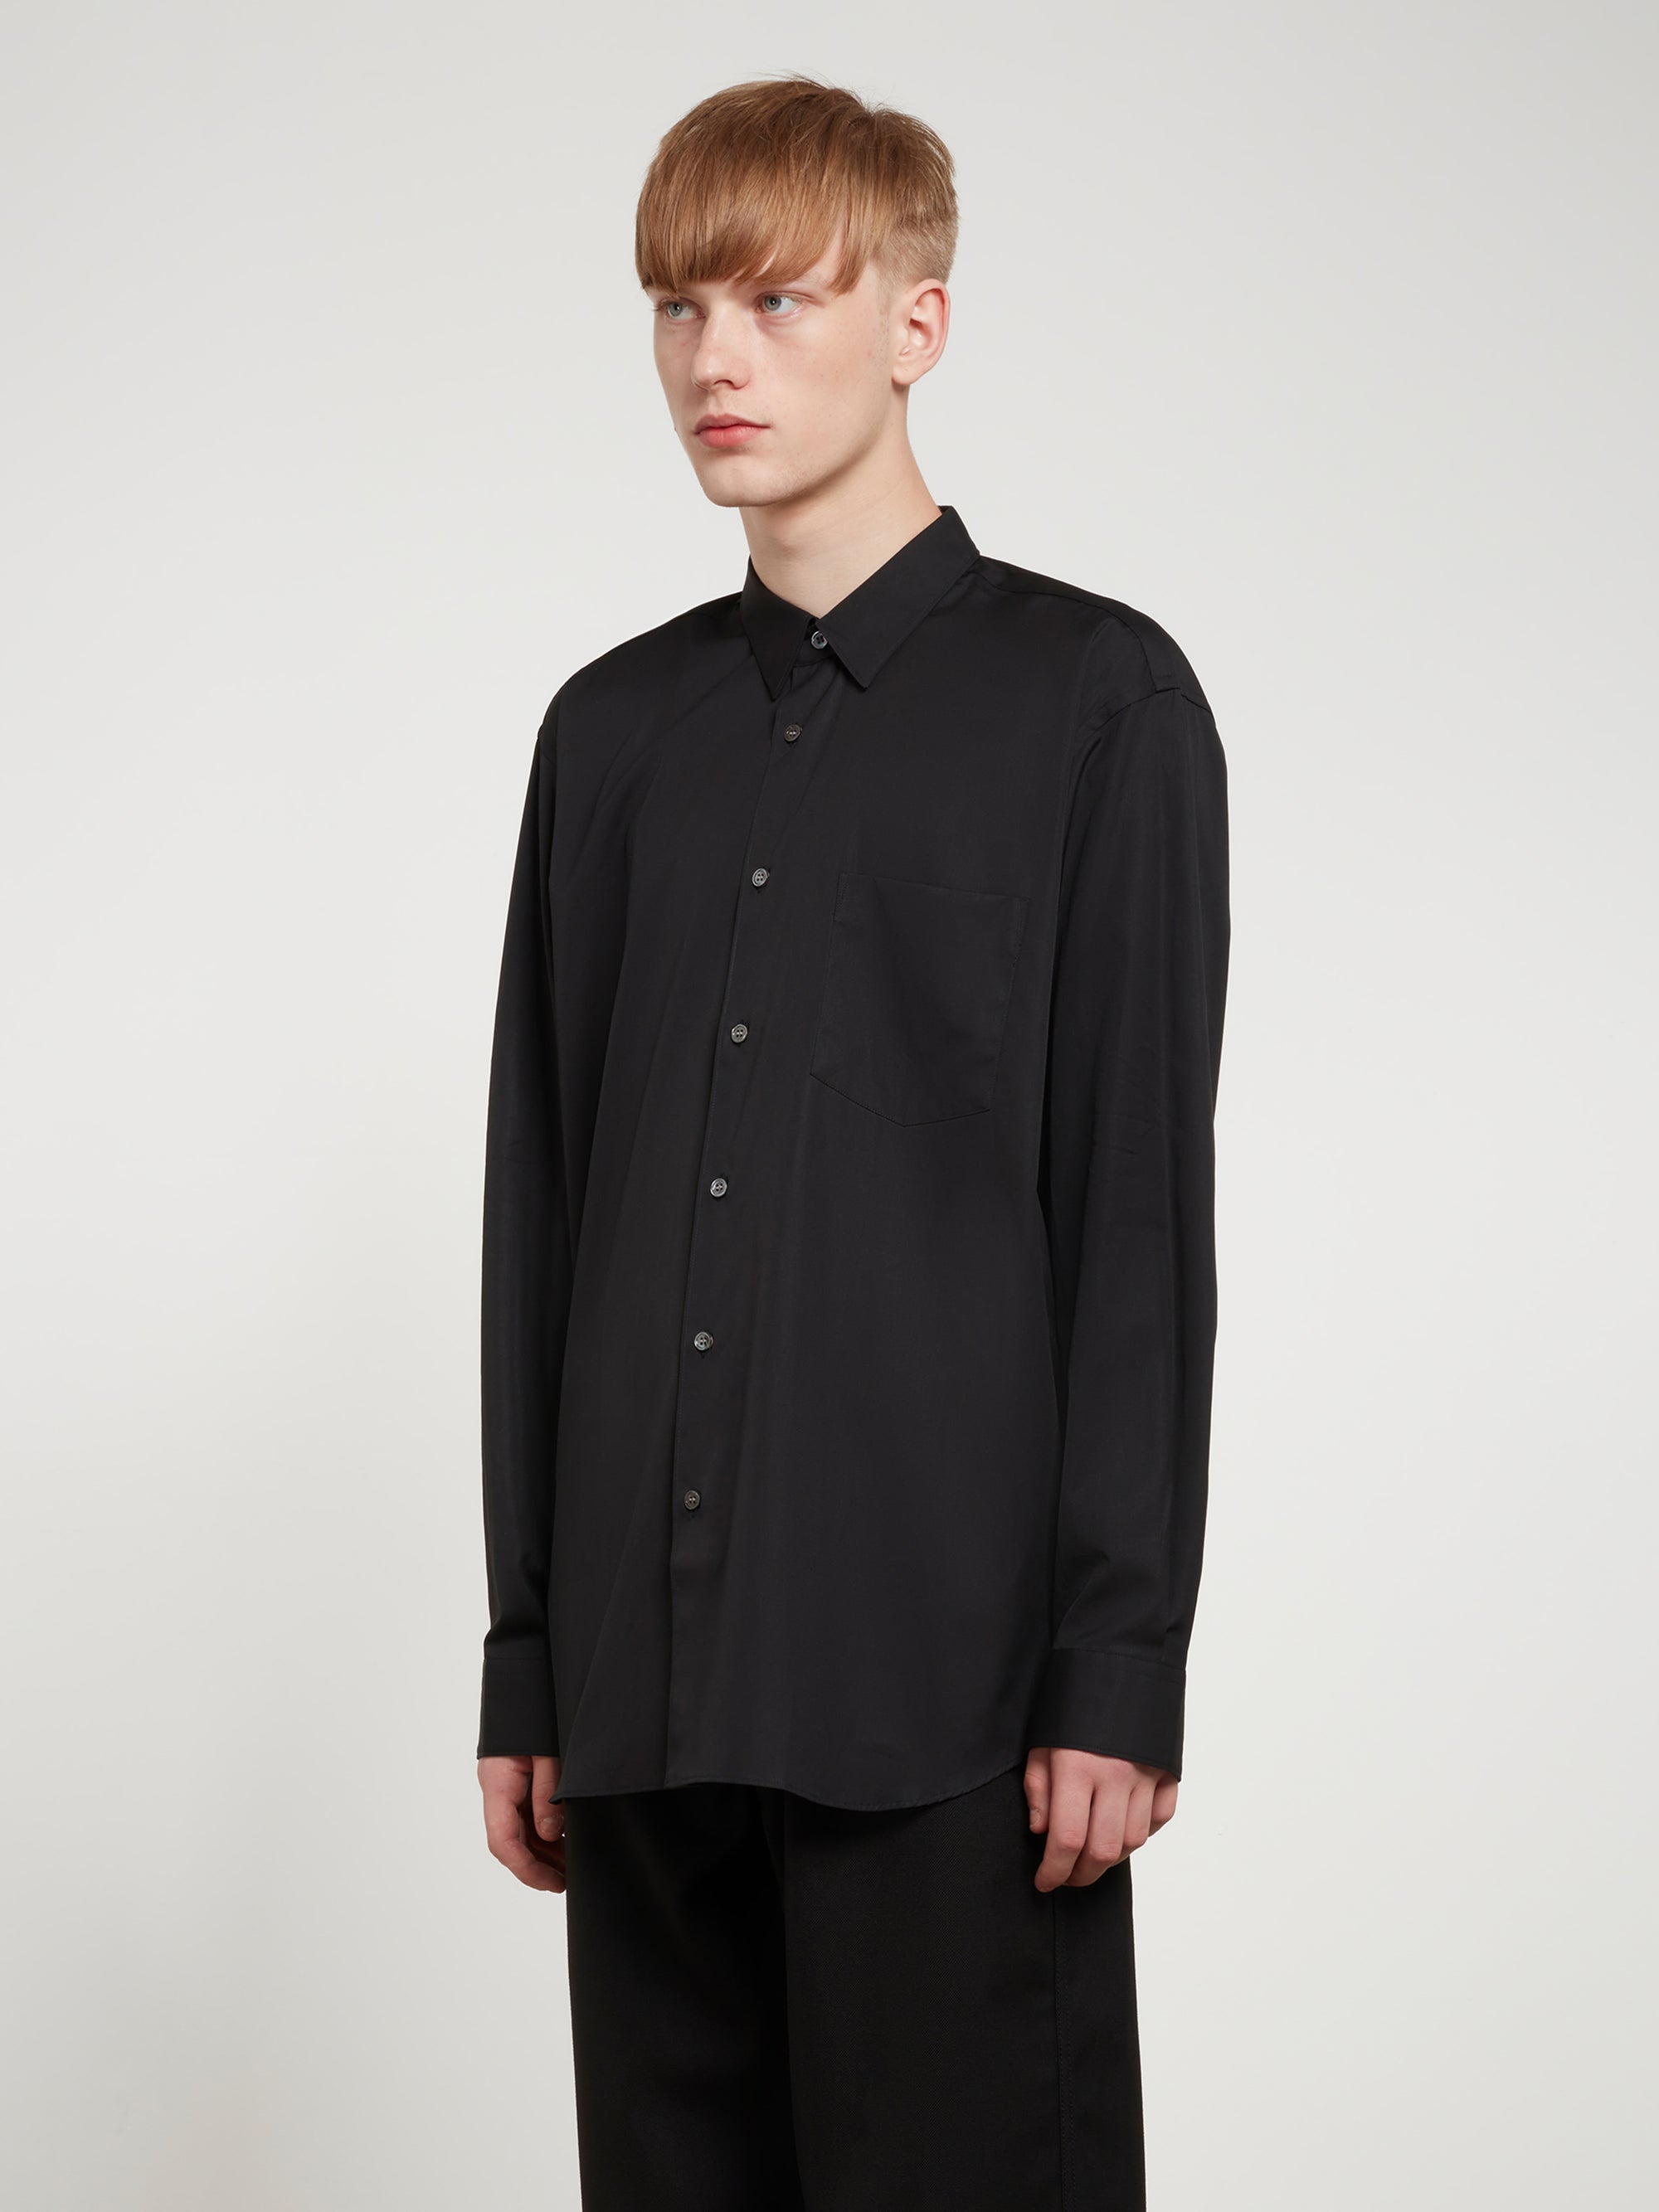 CDG Shirt Forever - Wide Fit Cotton Shirt - (Black) view 3